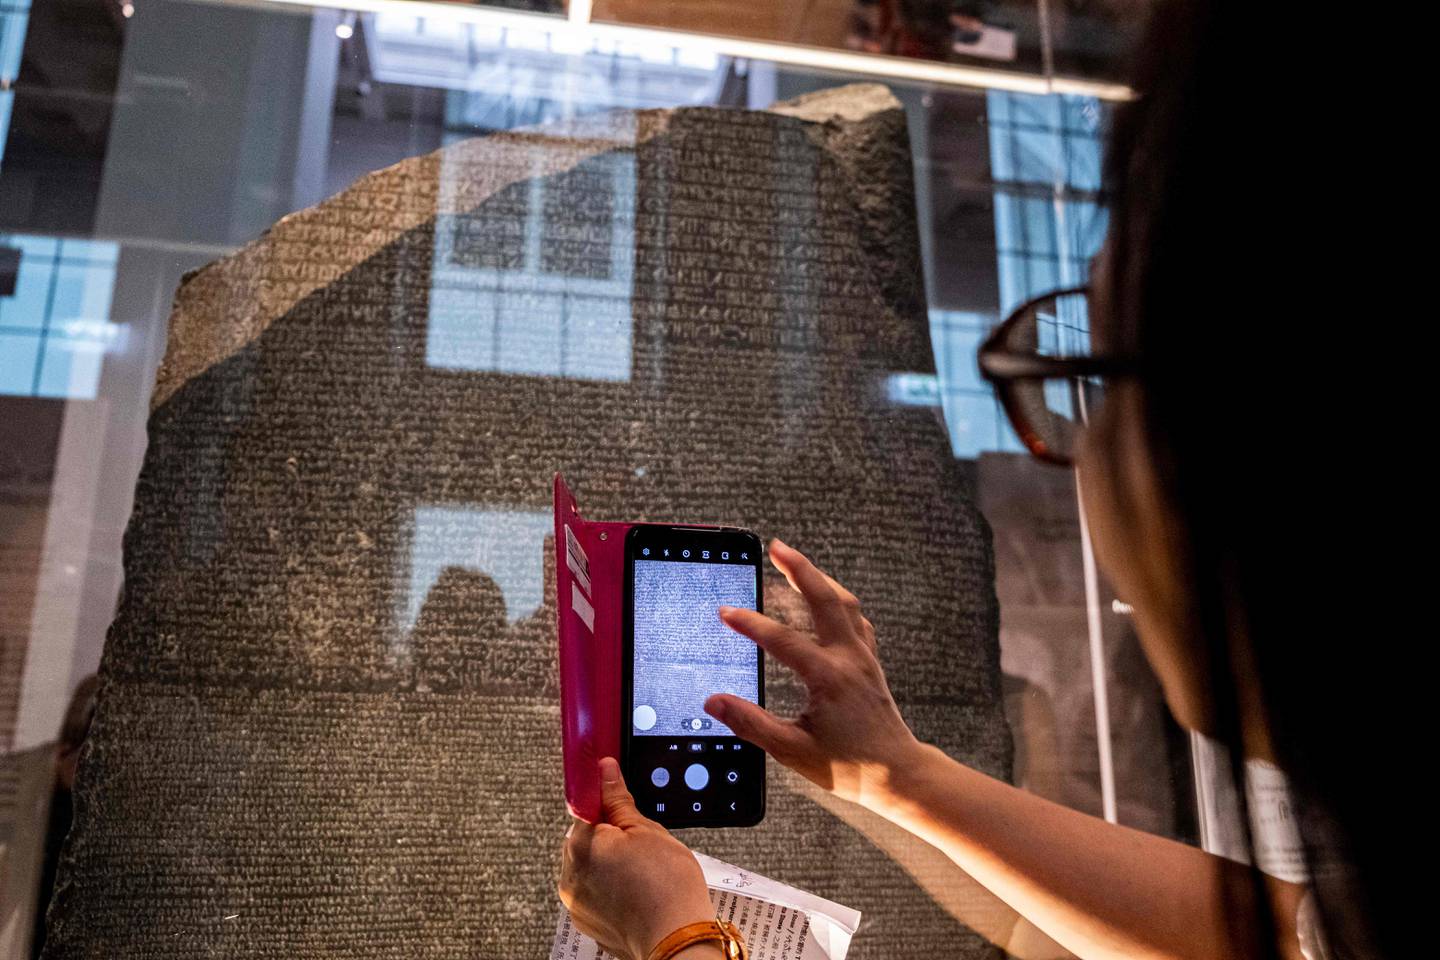 A visitor takes pictures of the Rosetta Stone at the British Museum. AFP